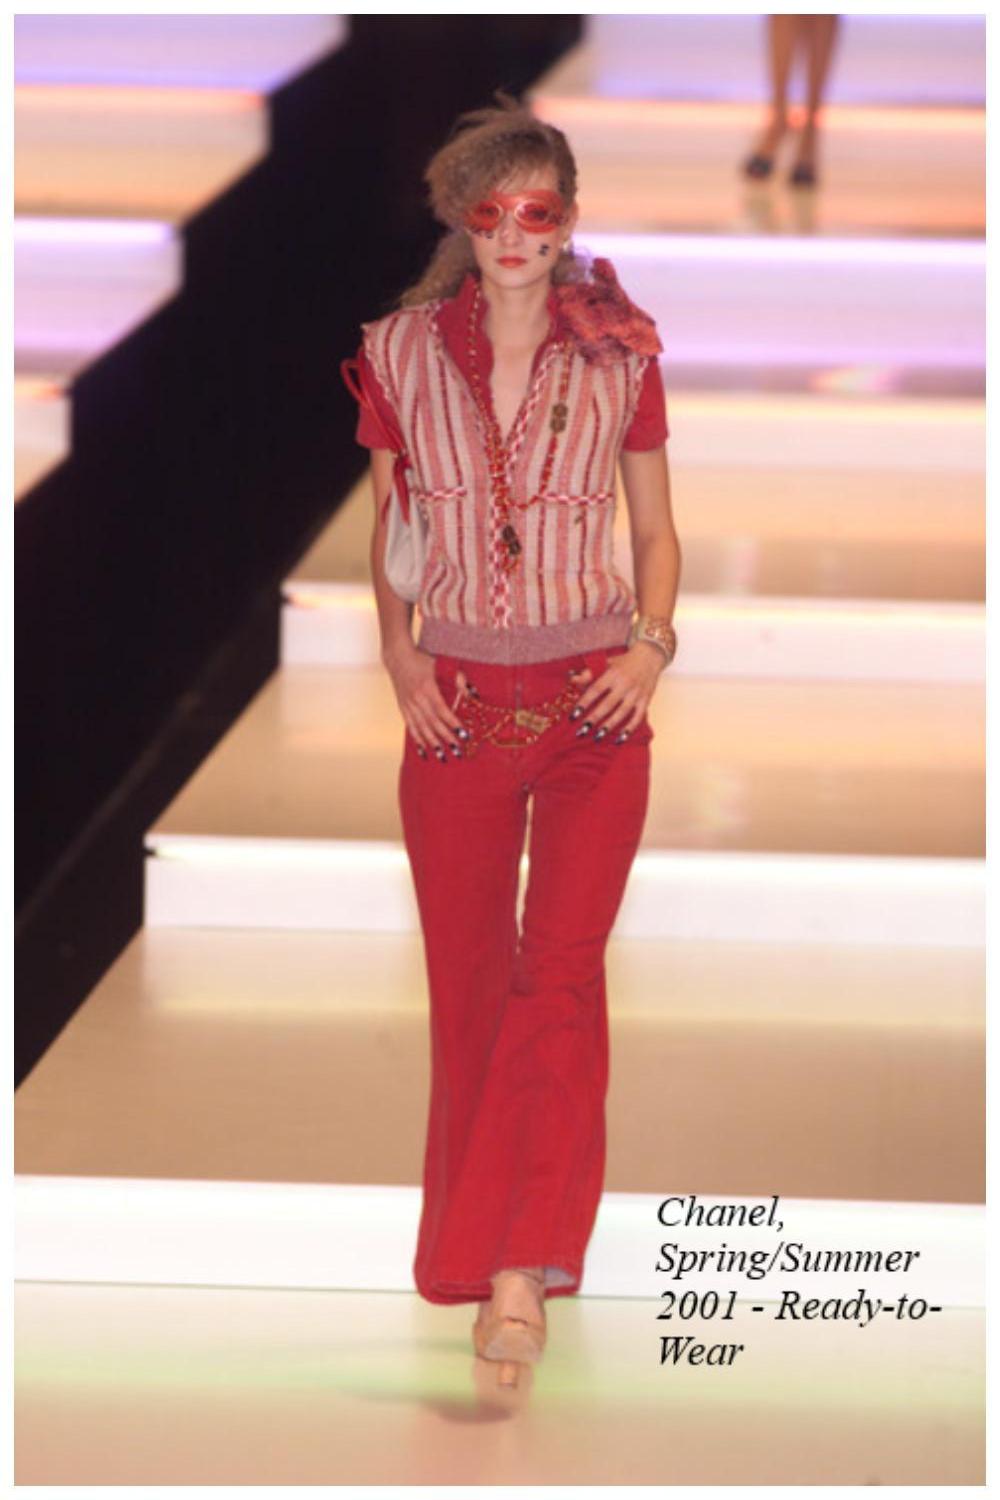 Rare! CHANEL & Karl Lagerfeld 01P Spring/Summer RTW 2001 red Denim Jumpsuit

Chanel by Karl Lagerfeld
Collection: Spring/Summer 2001 - Ready-to-Wear
Chanel style: 01P / B1801 / P17788W02775
Country of production: Italy
Dimensions: 38 it / 34